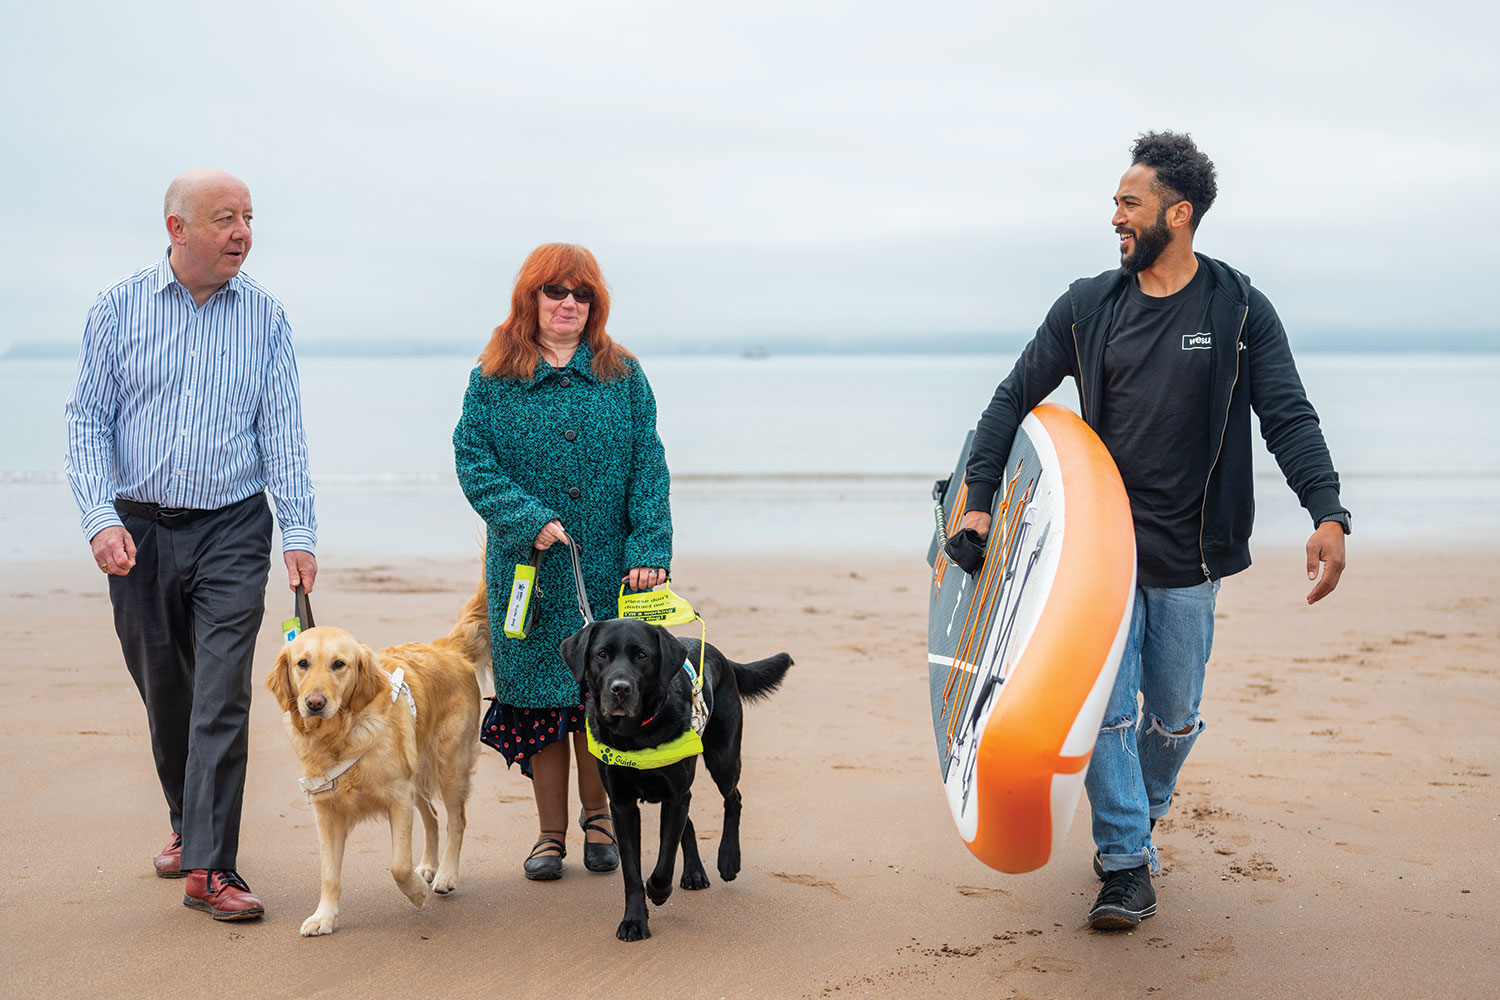 photo of Cllrs Steve and Mandy Darling, from Torbay Council, walking their guide dogs with a local business owner on the beach